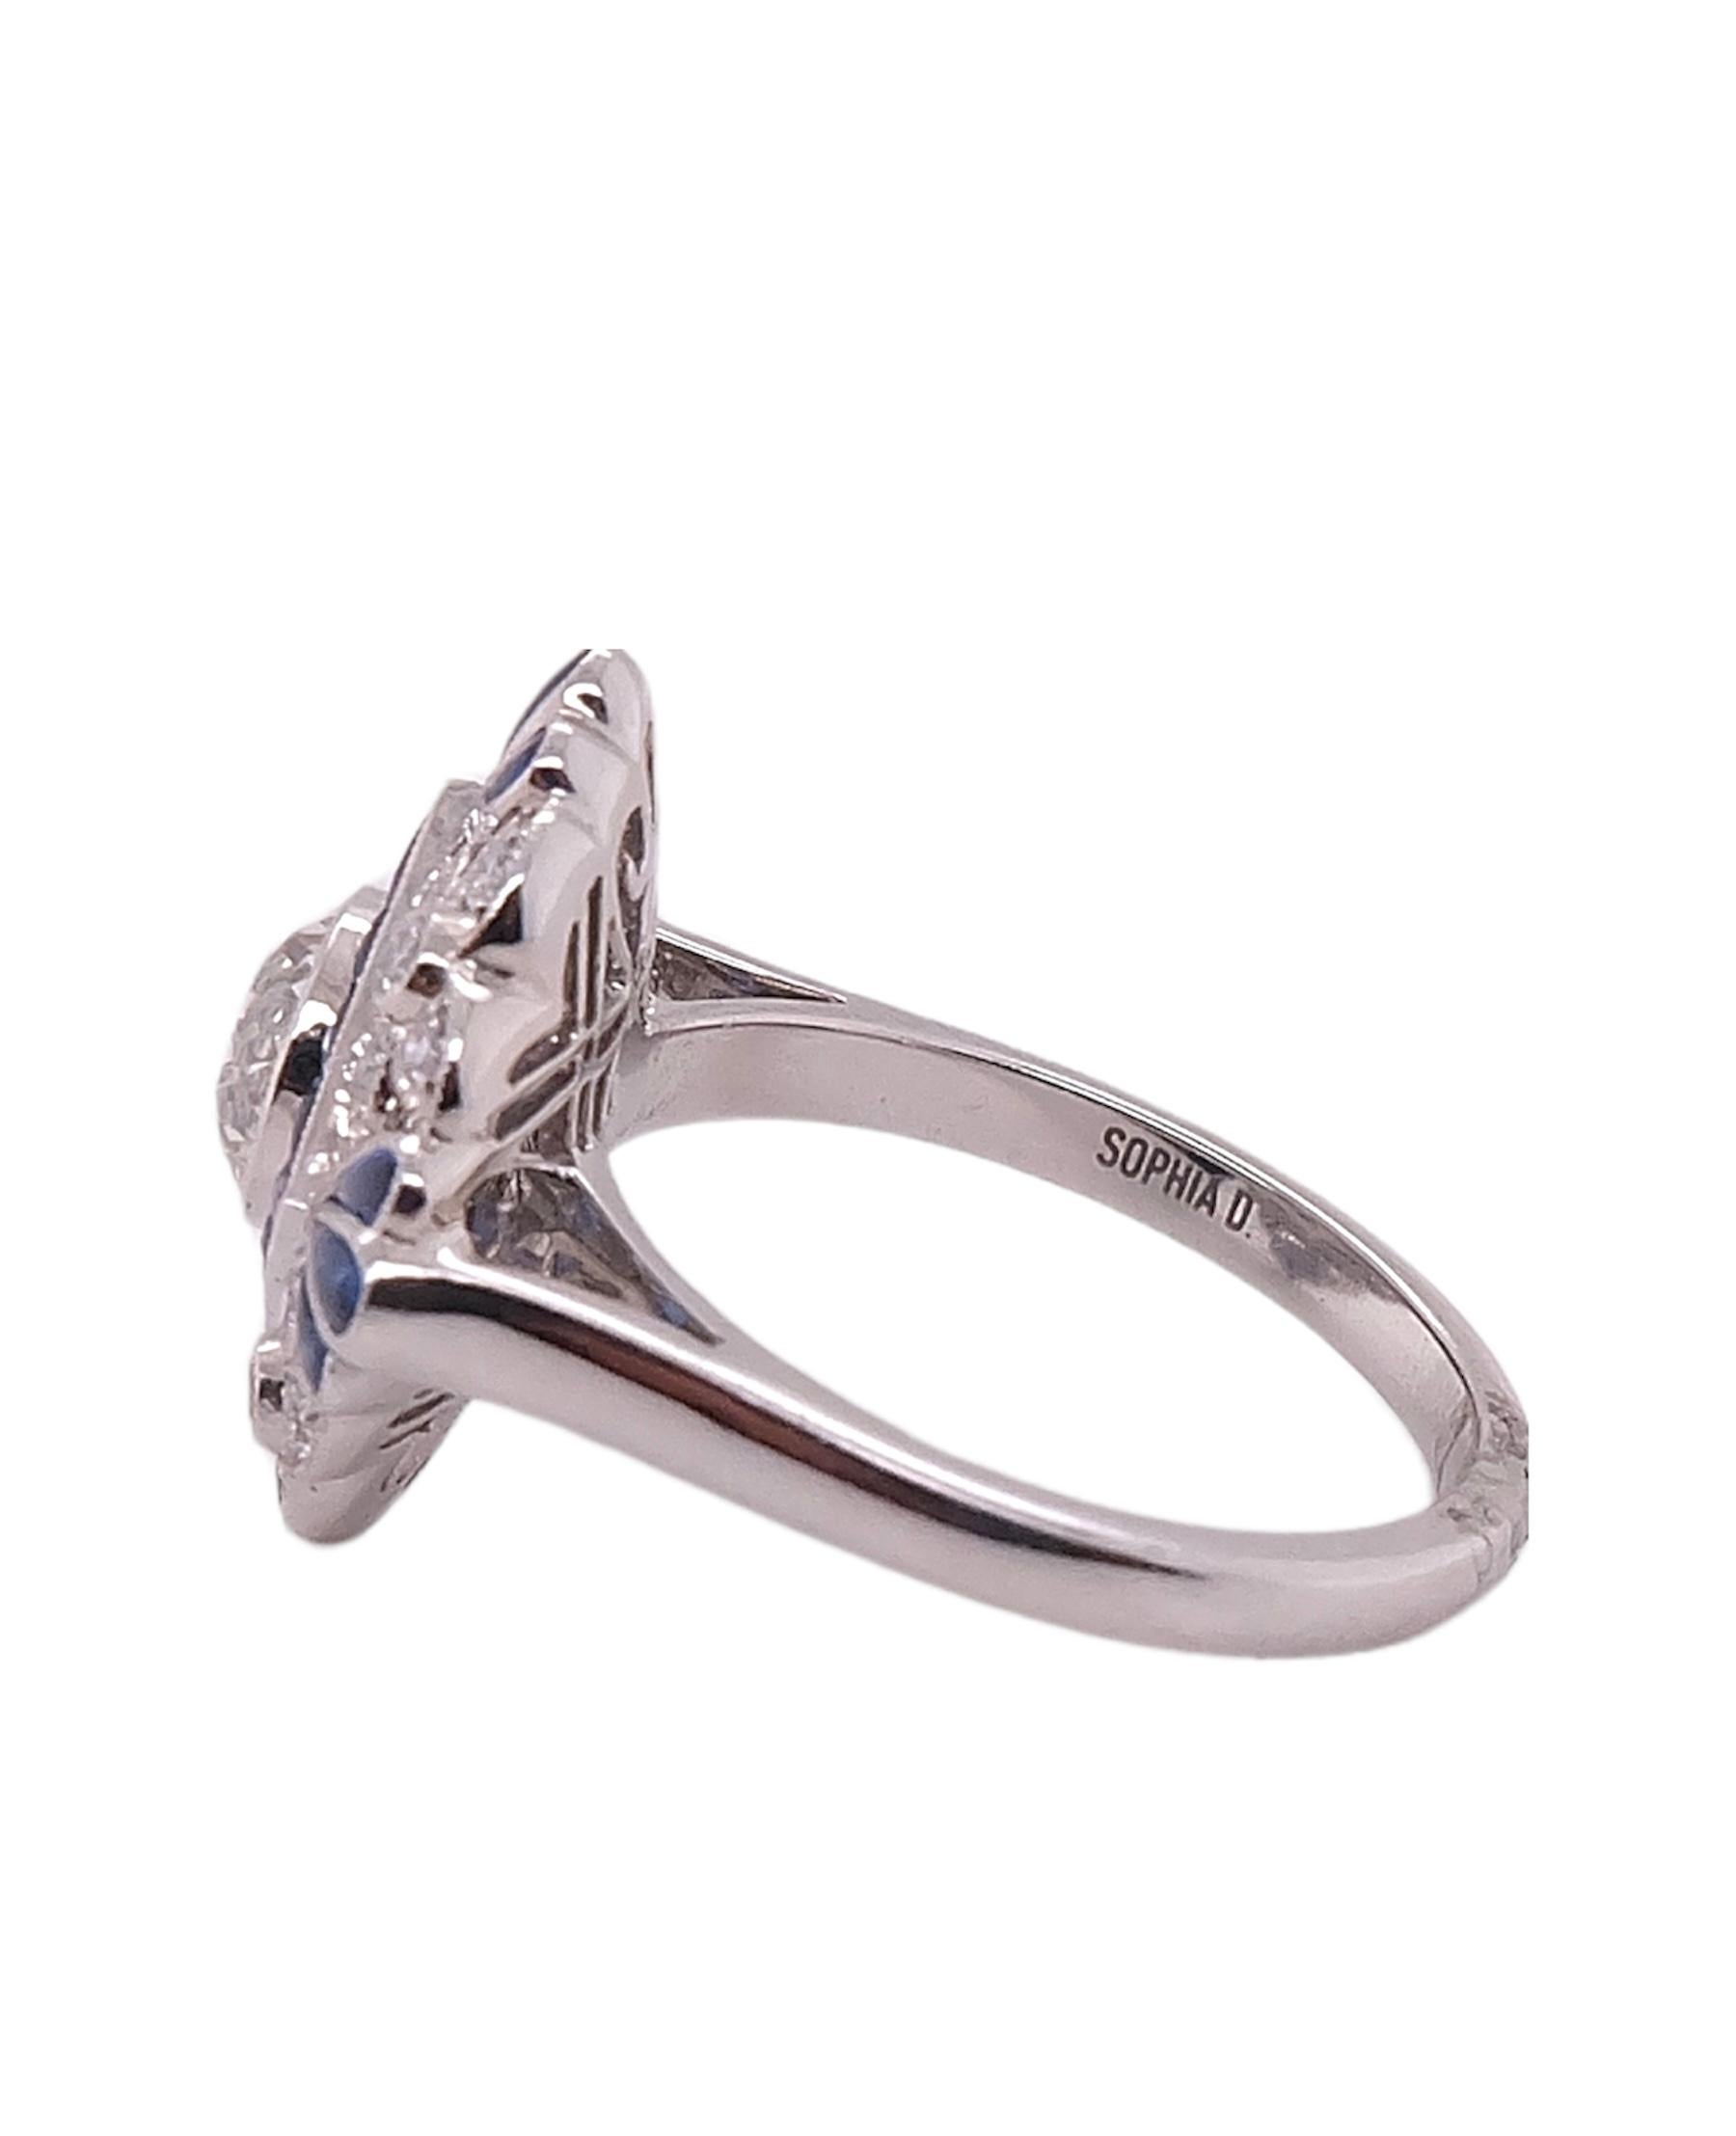 Round Cut Blue Sapphire and Diamond Art Deco Style Platinum Ring by Sophia D. For Sale